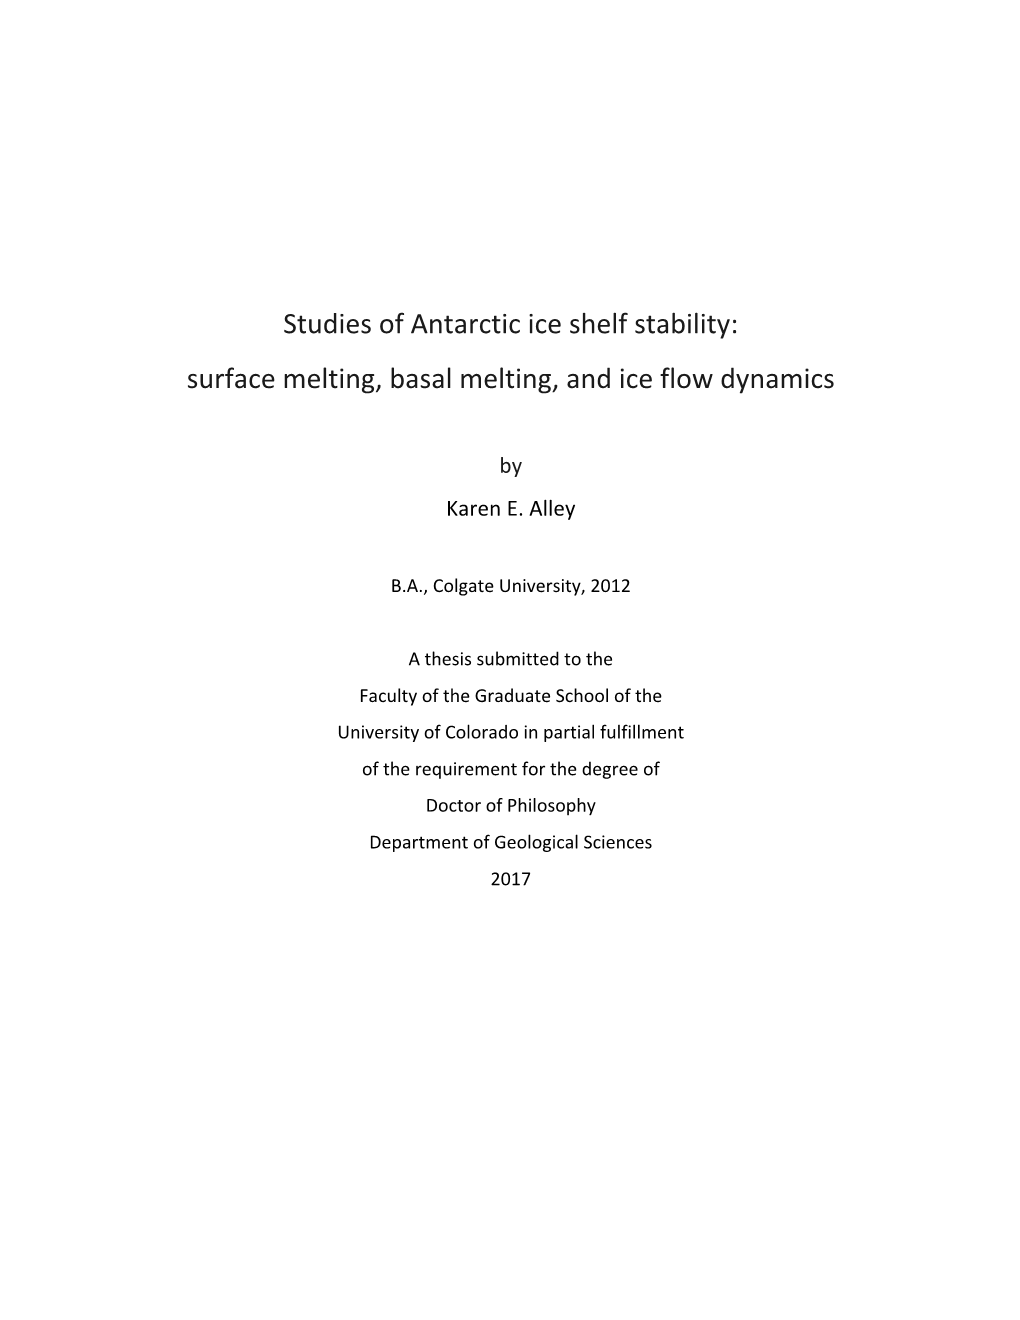 Studies of Antarctic Ice Shelf Stability: Surface Melting, Basal Melting, and Ice Flow Dynamics